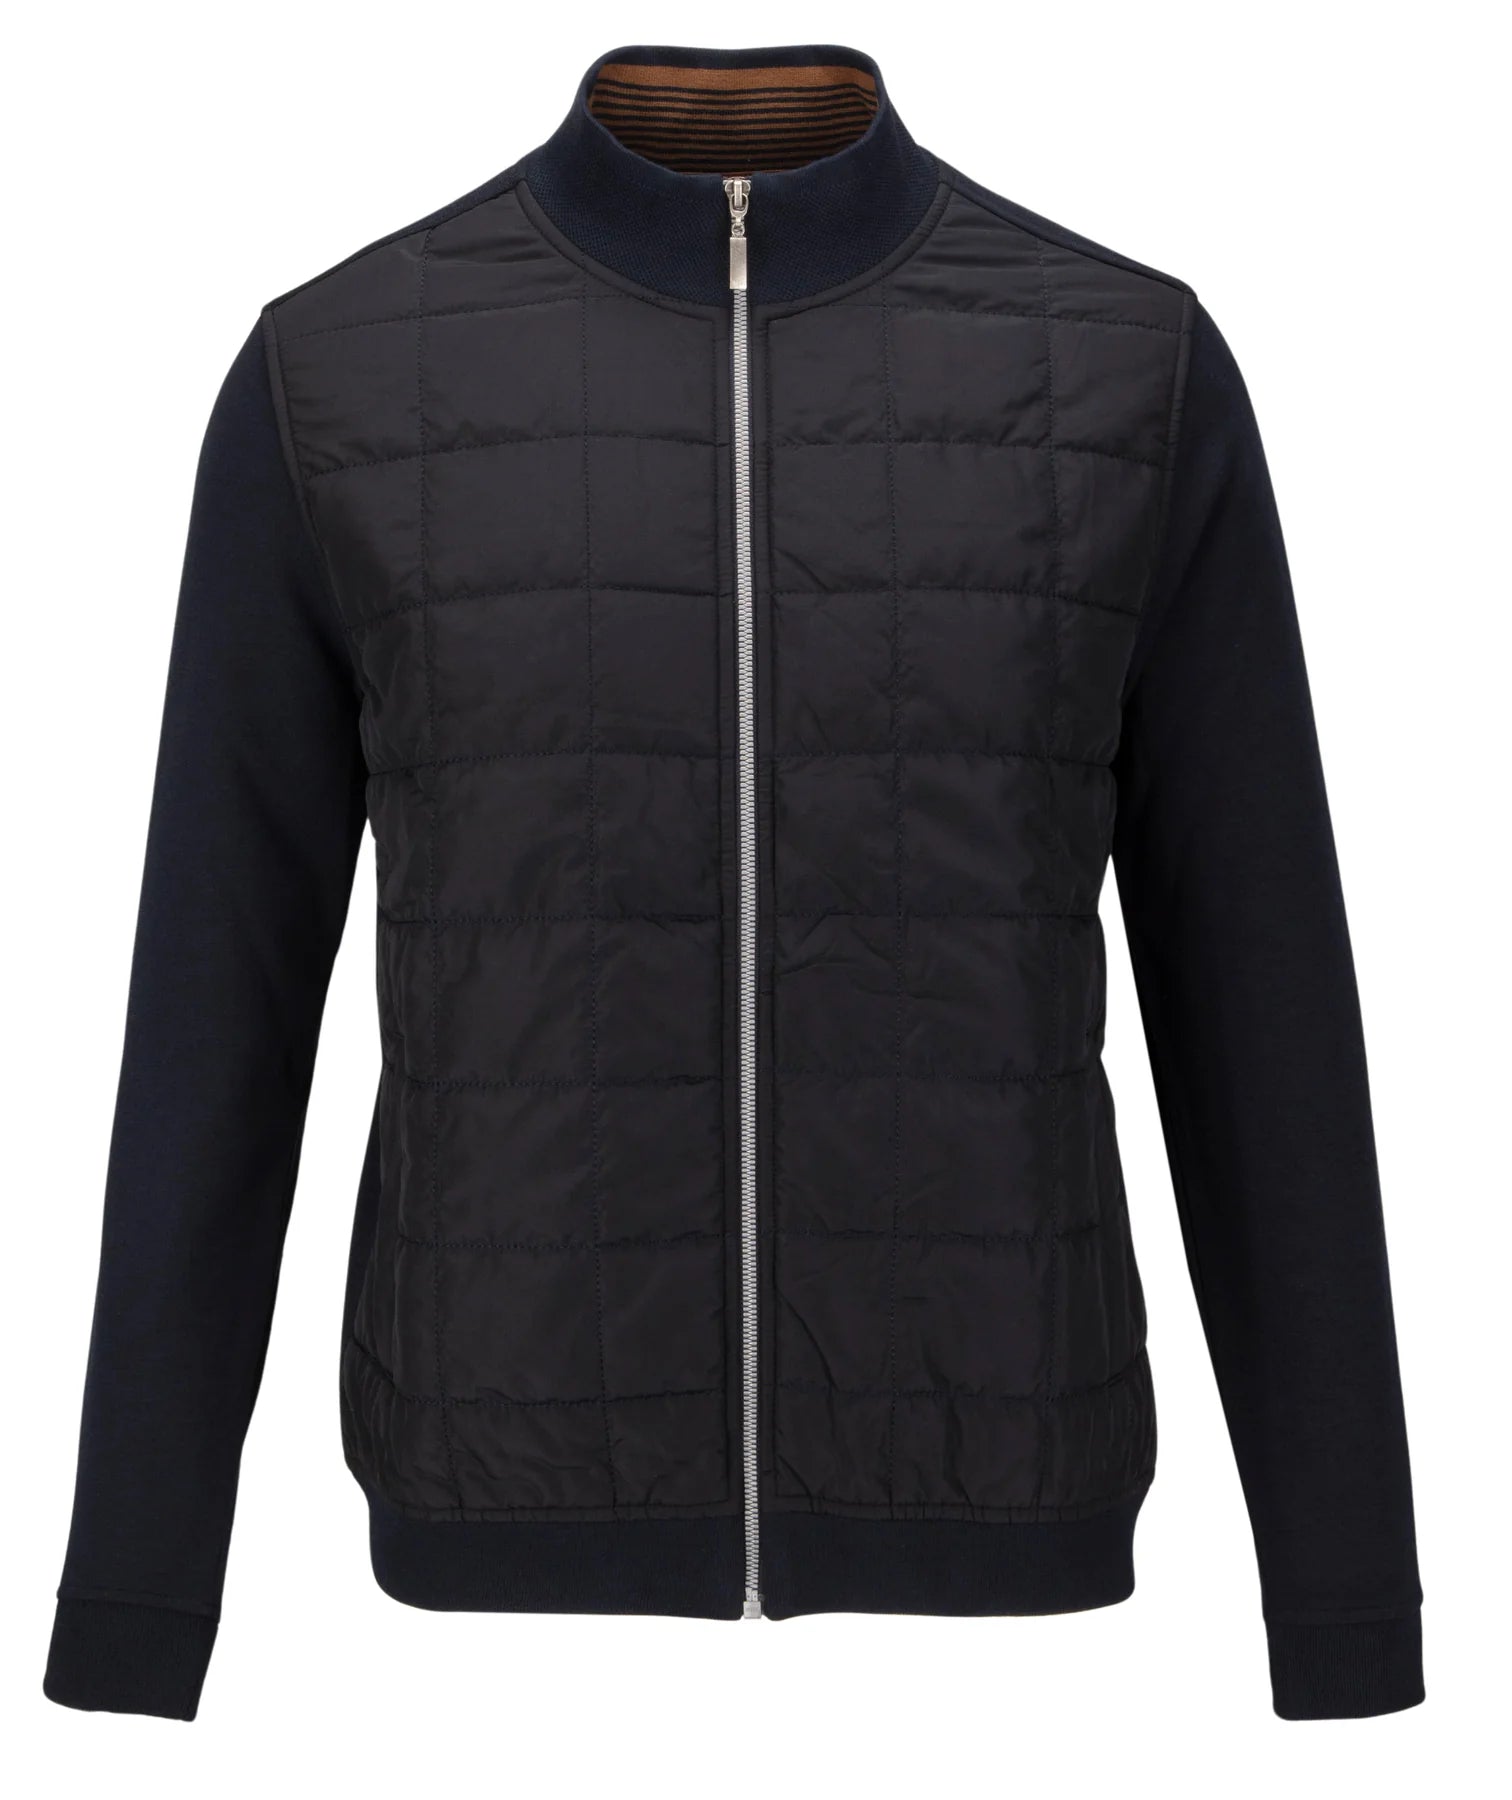 Guide London Navy Quilted Front Hybrid Sweater (SW1036)